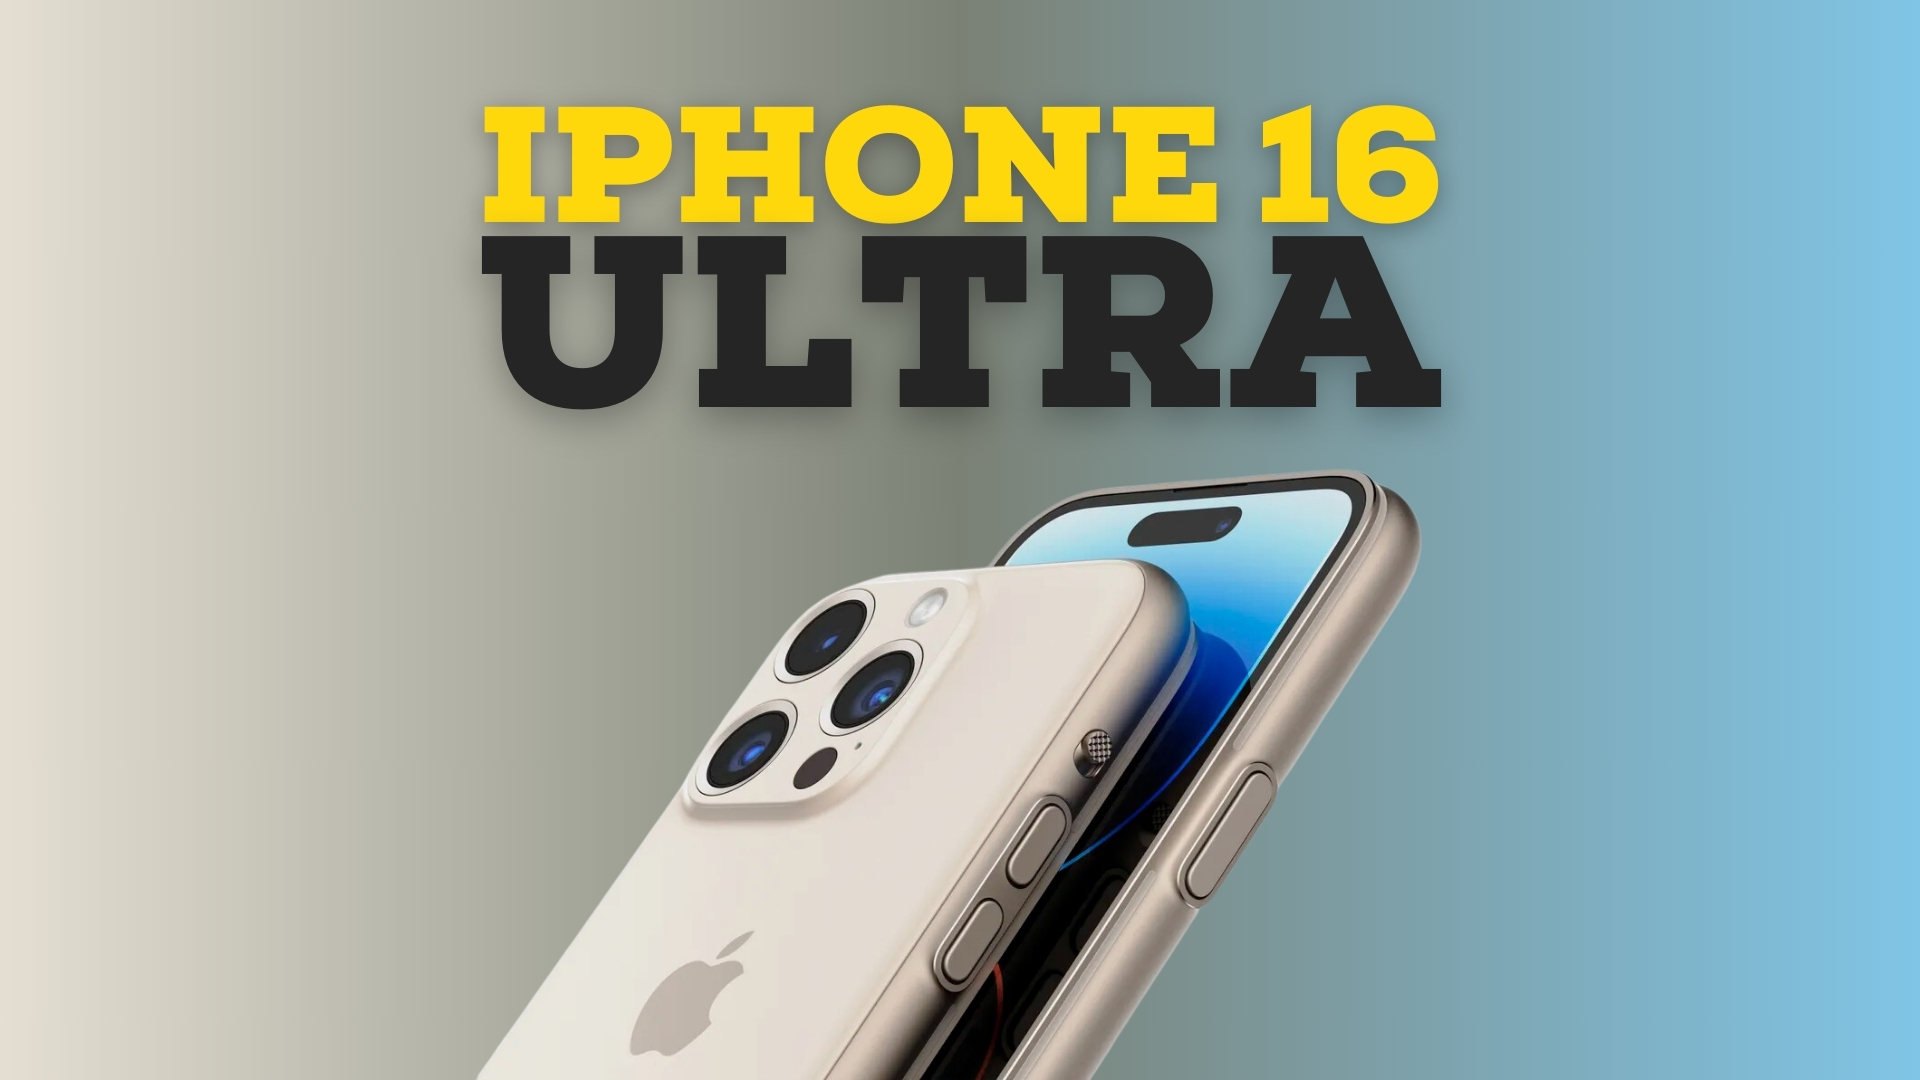 iPhone 16: Release date rumors, news, and more